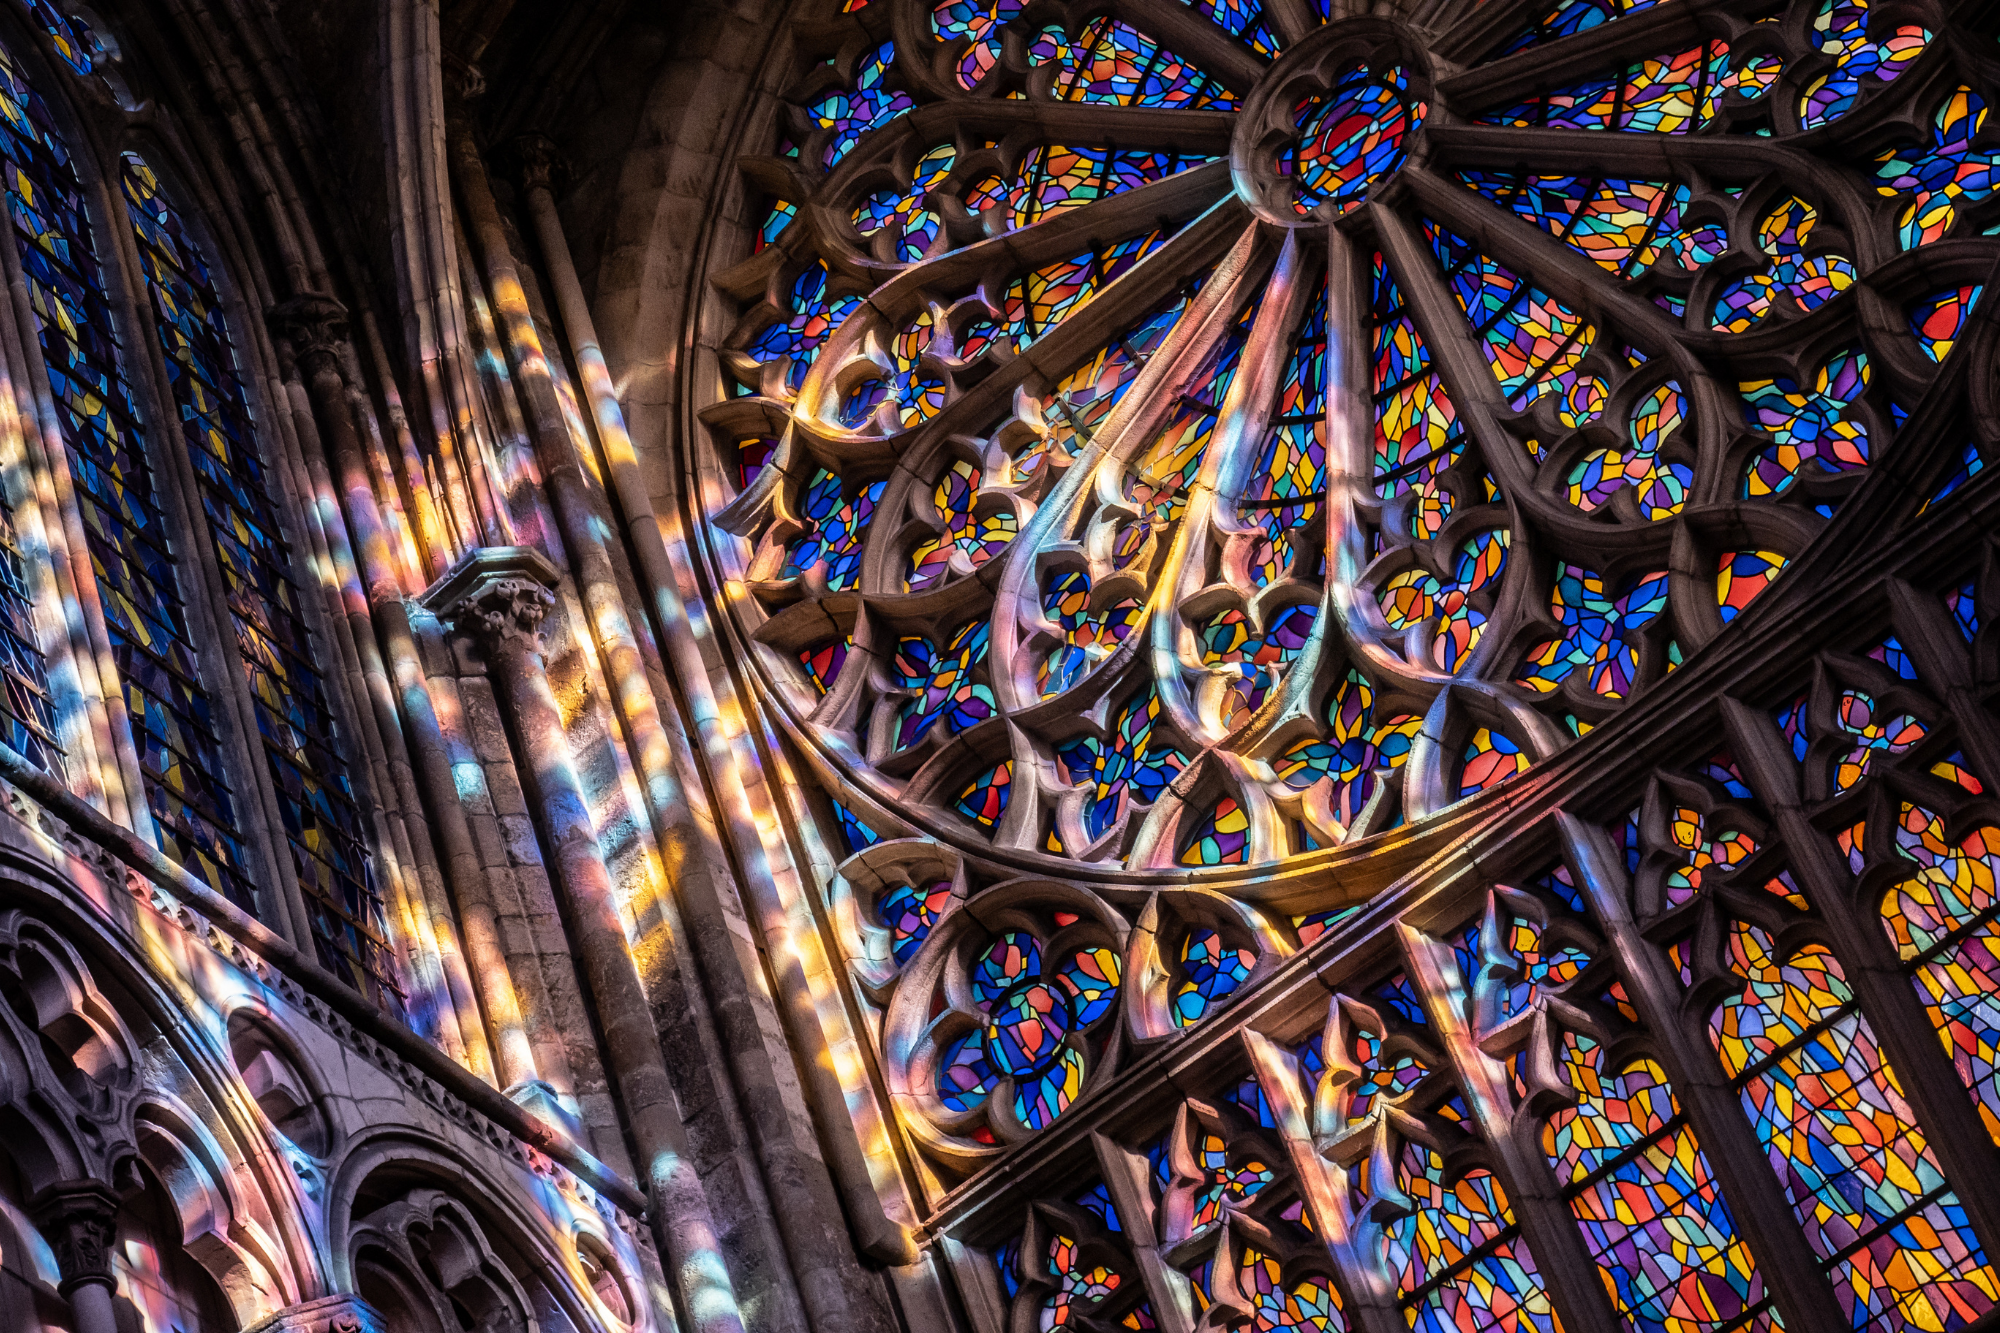 Stained Glass (2000 × 1333 px)